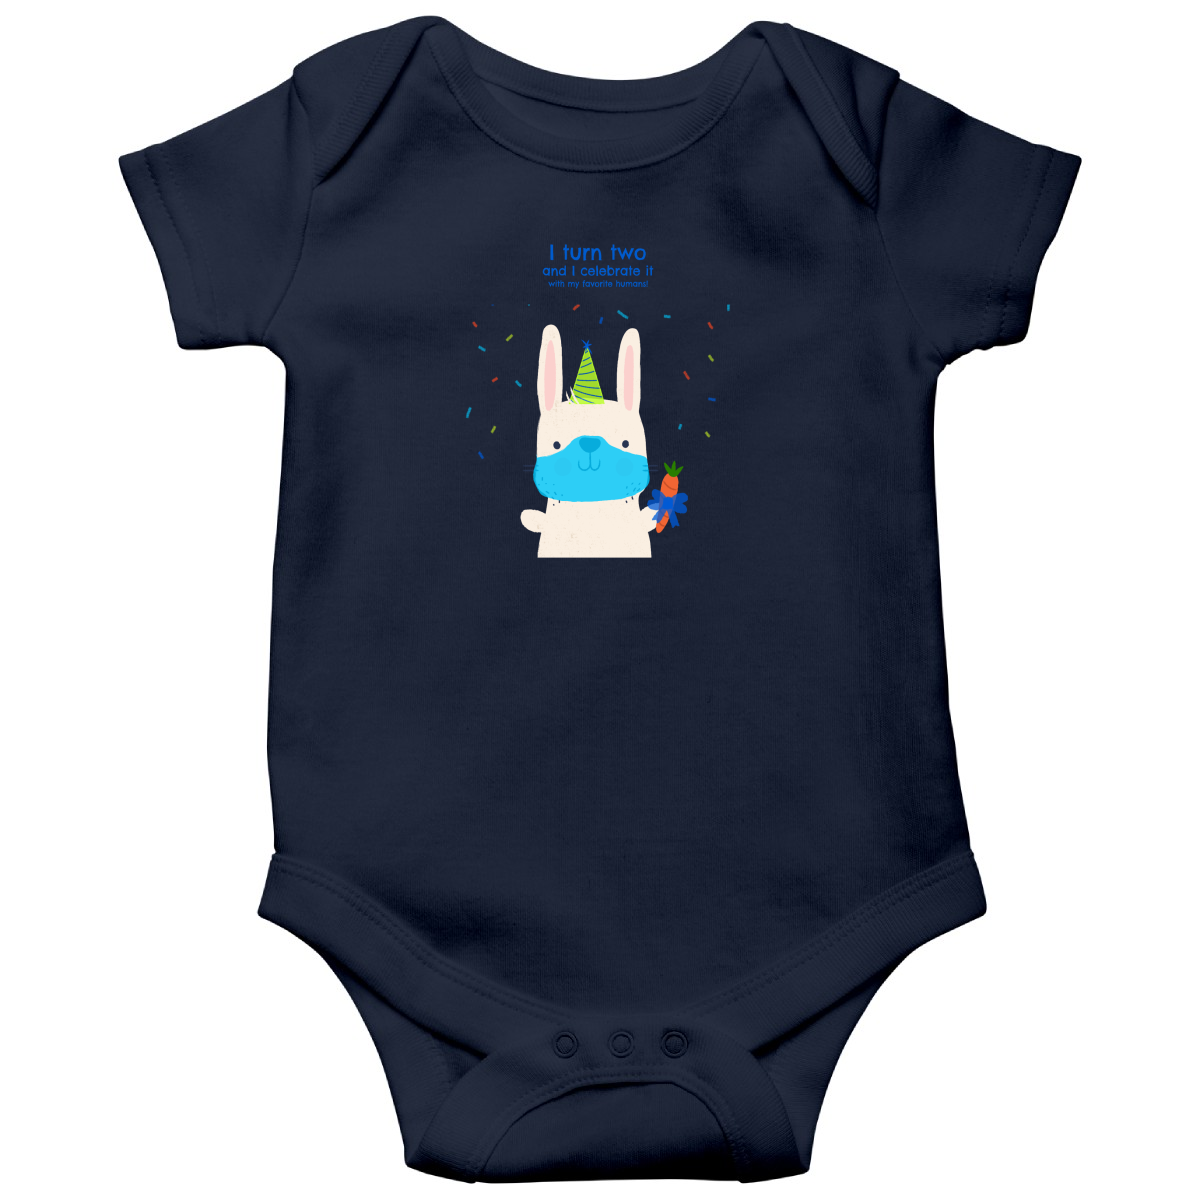 I turn two and I celebrate it with my favorite humans  Baby Bodysuits | Navy